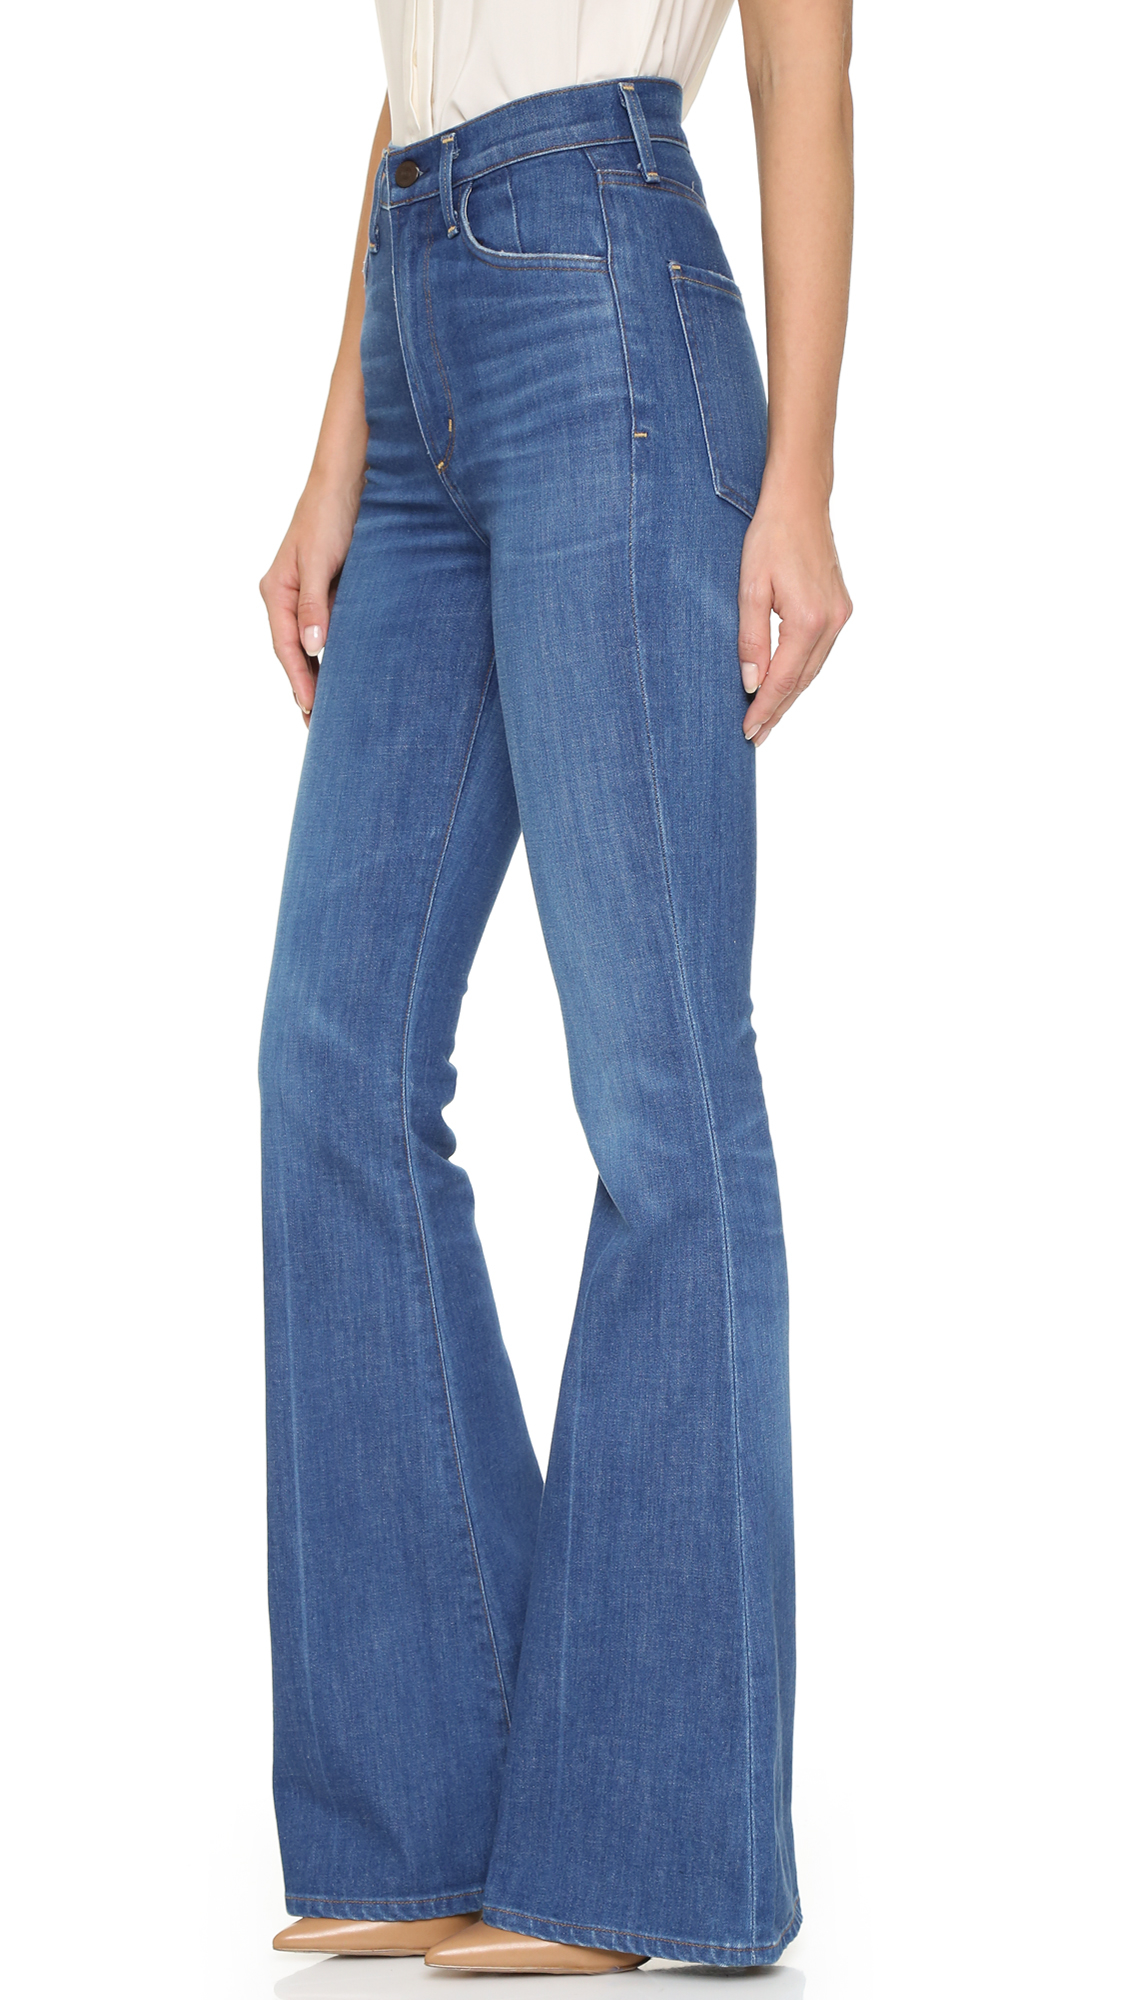 Lyst - Citizens Of Humanity Cherie High Rise Flare Jeans in Blue